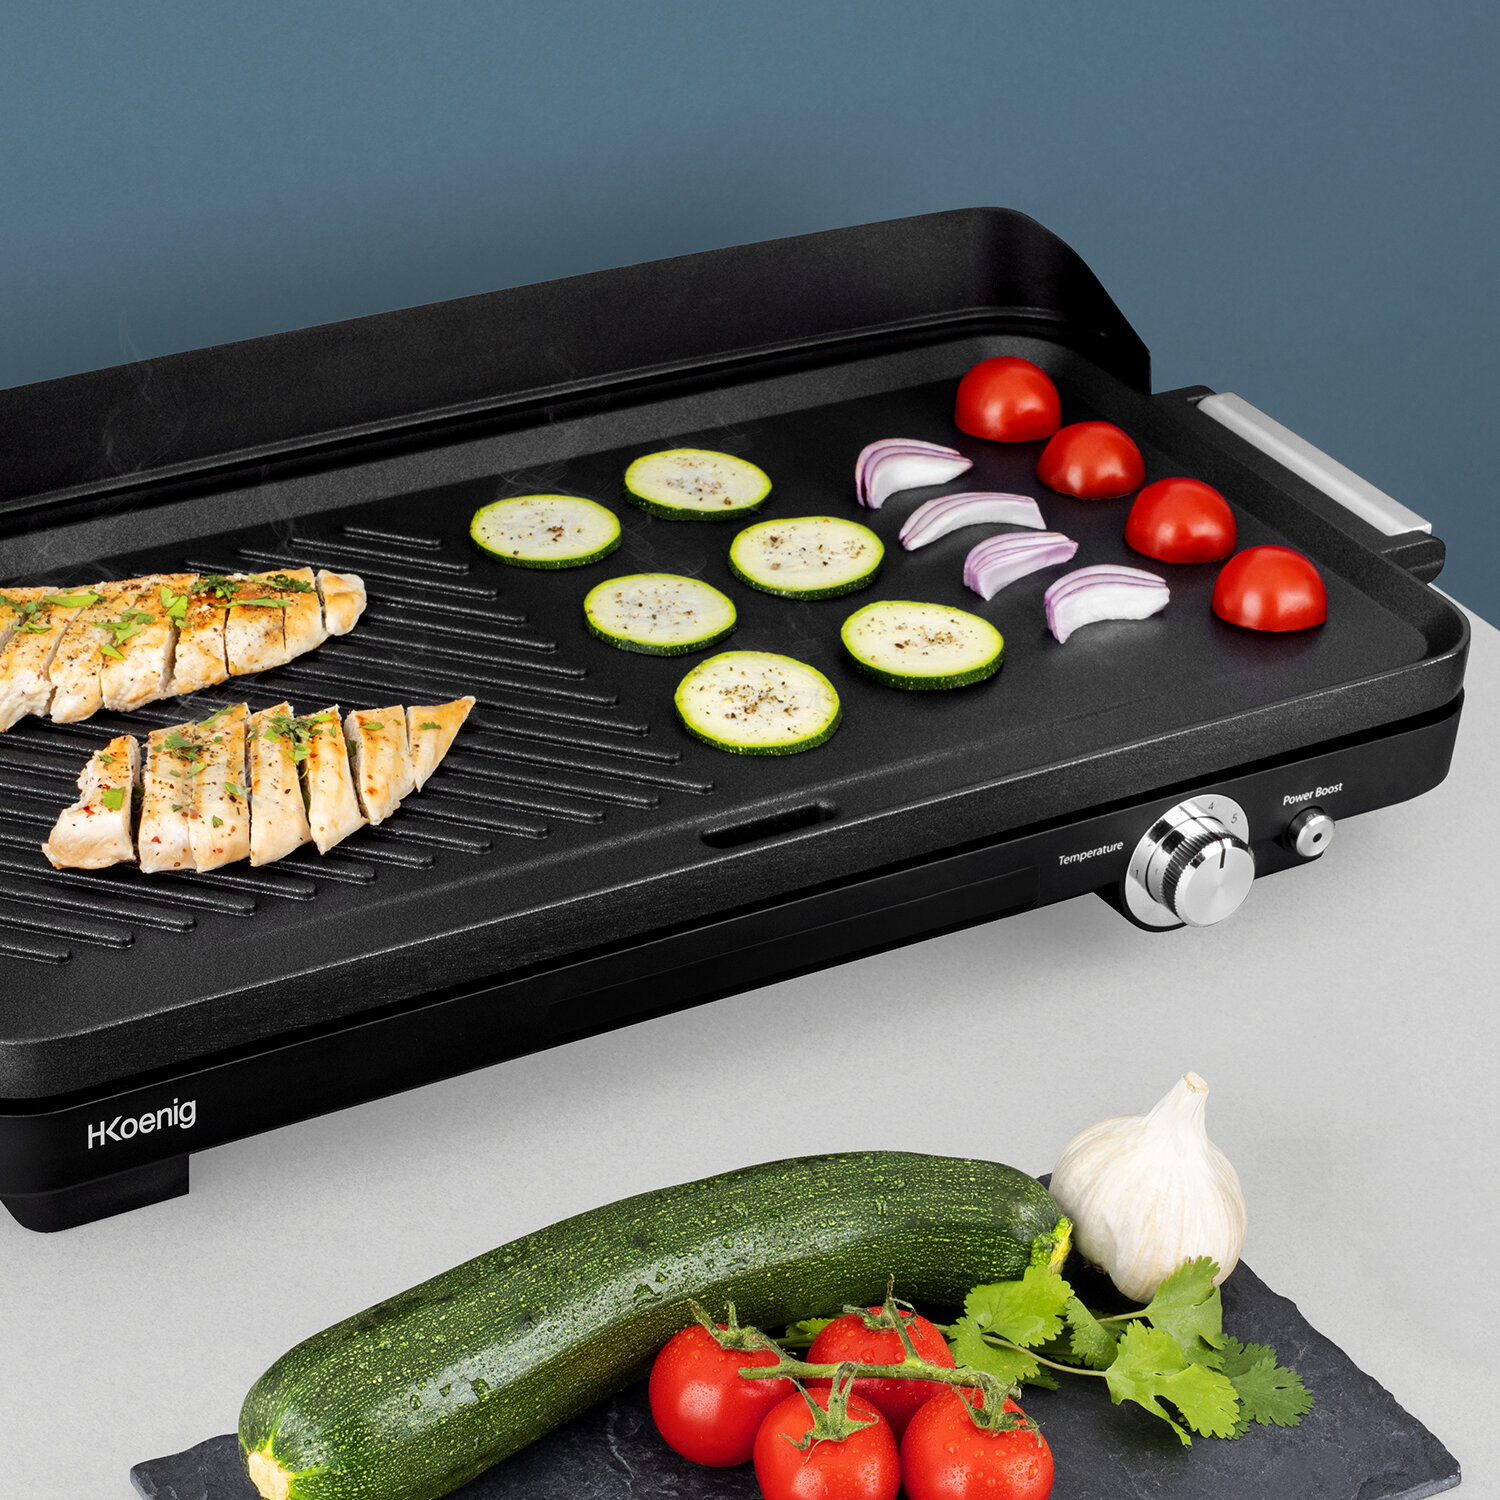 Our Products Daily Cooking Plancha Grx330 Koenig En